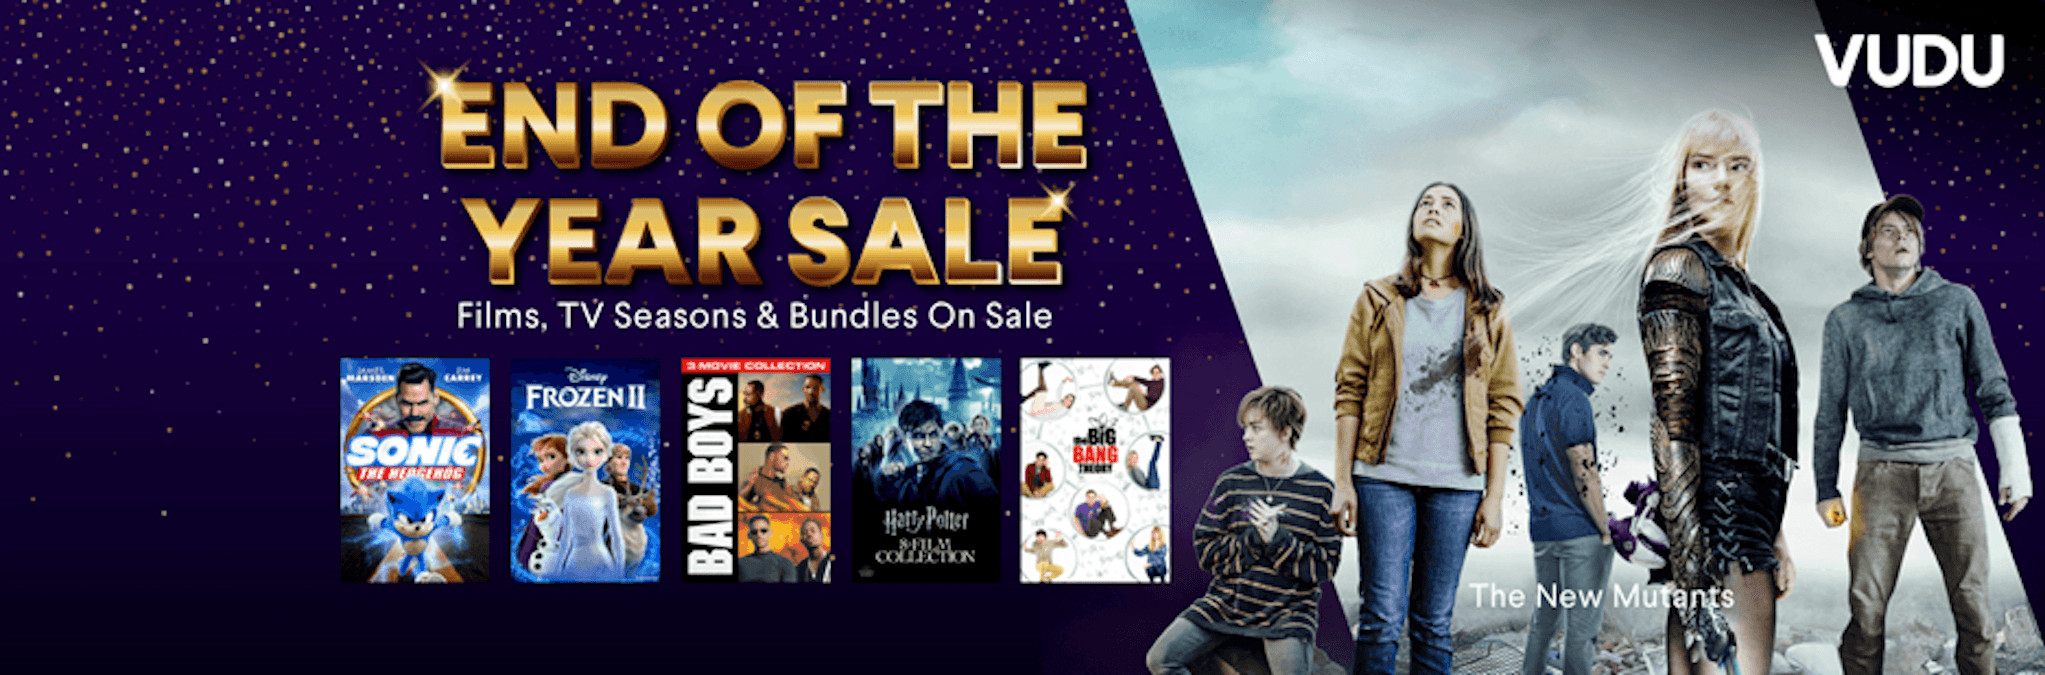 Save on The Office, Friends, Game of Thrones & More in Vudu’s End of Year Sale